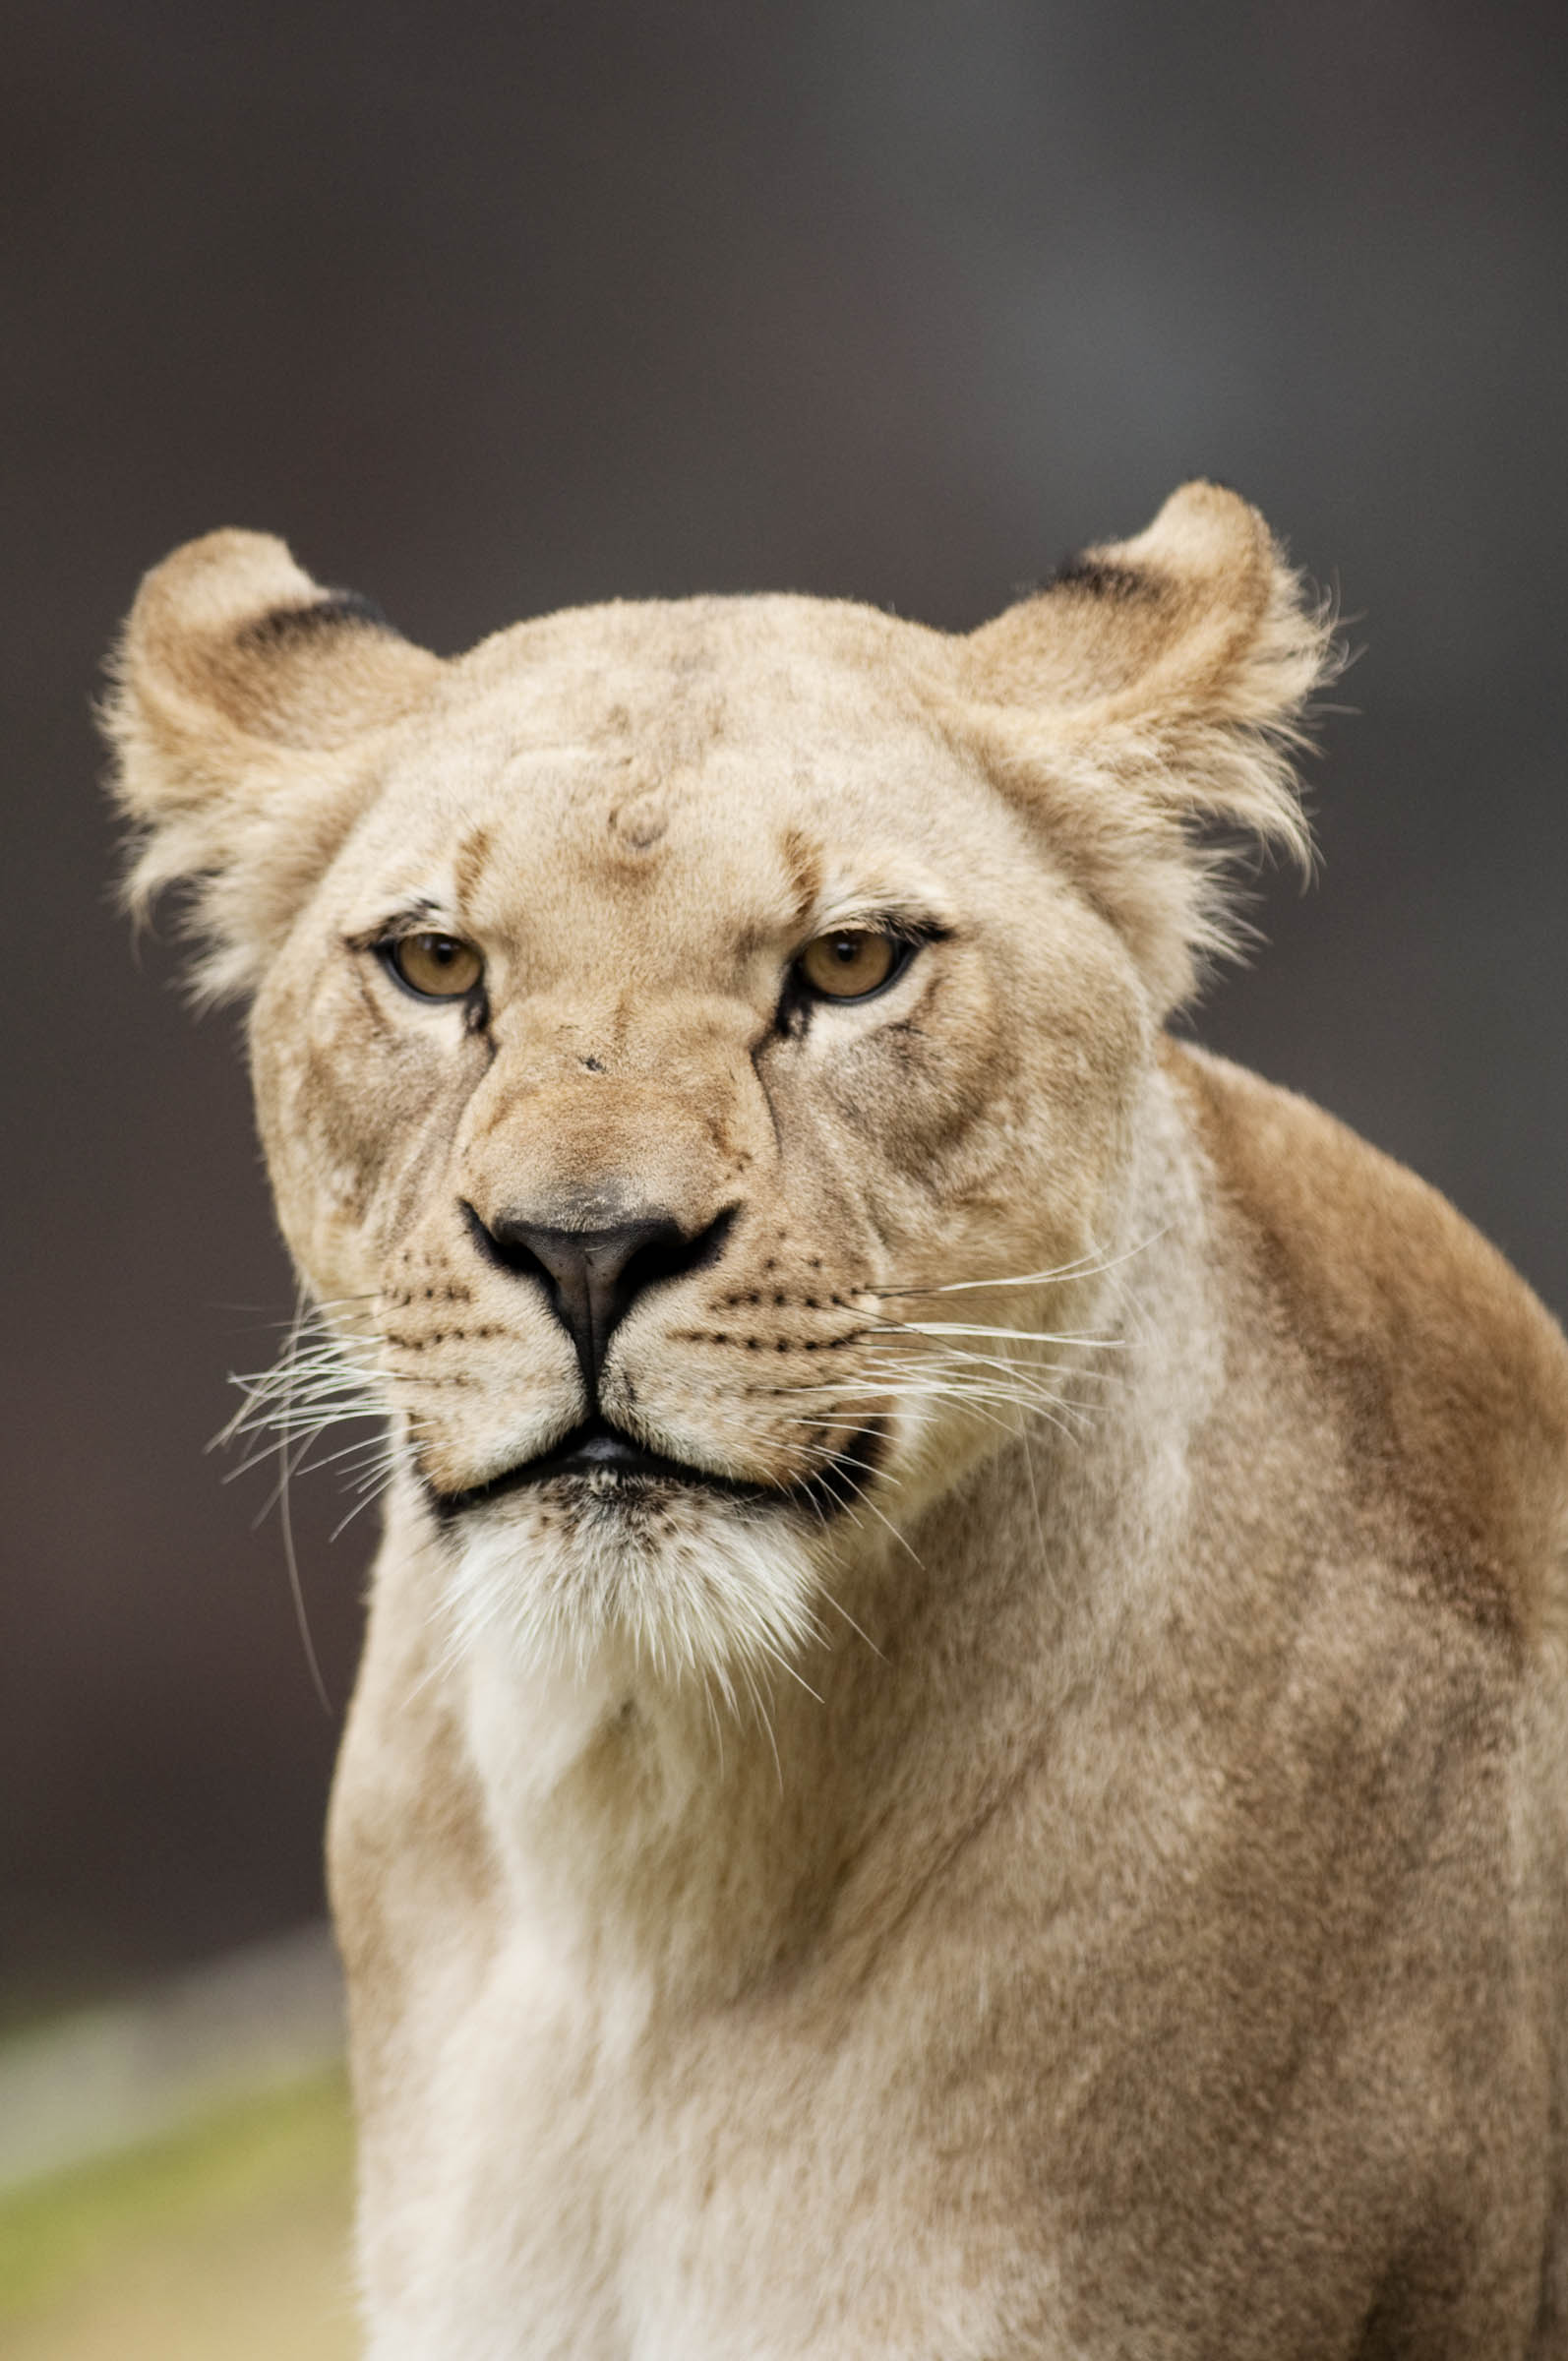 Officials say Neka, one of two female African lions at the Oregon Zoo, is pregnant and could give birth within the next 10 days.